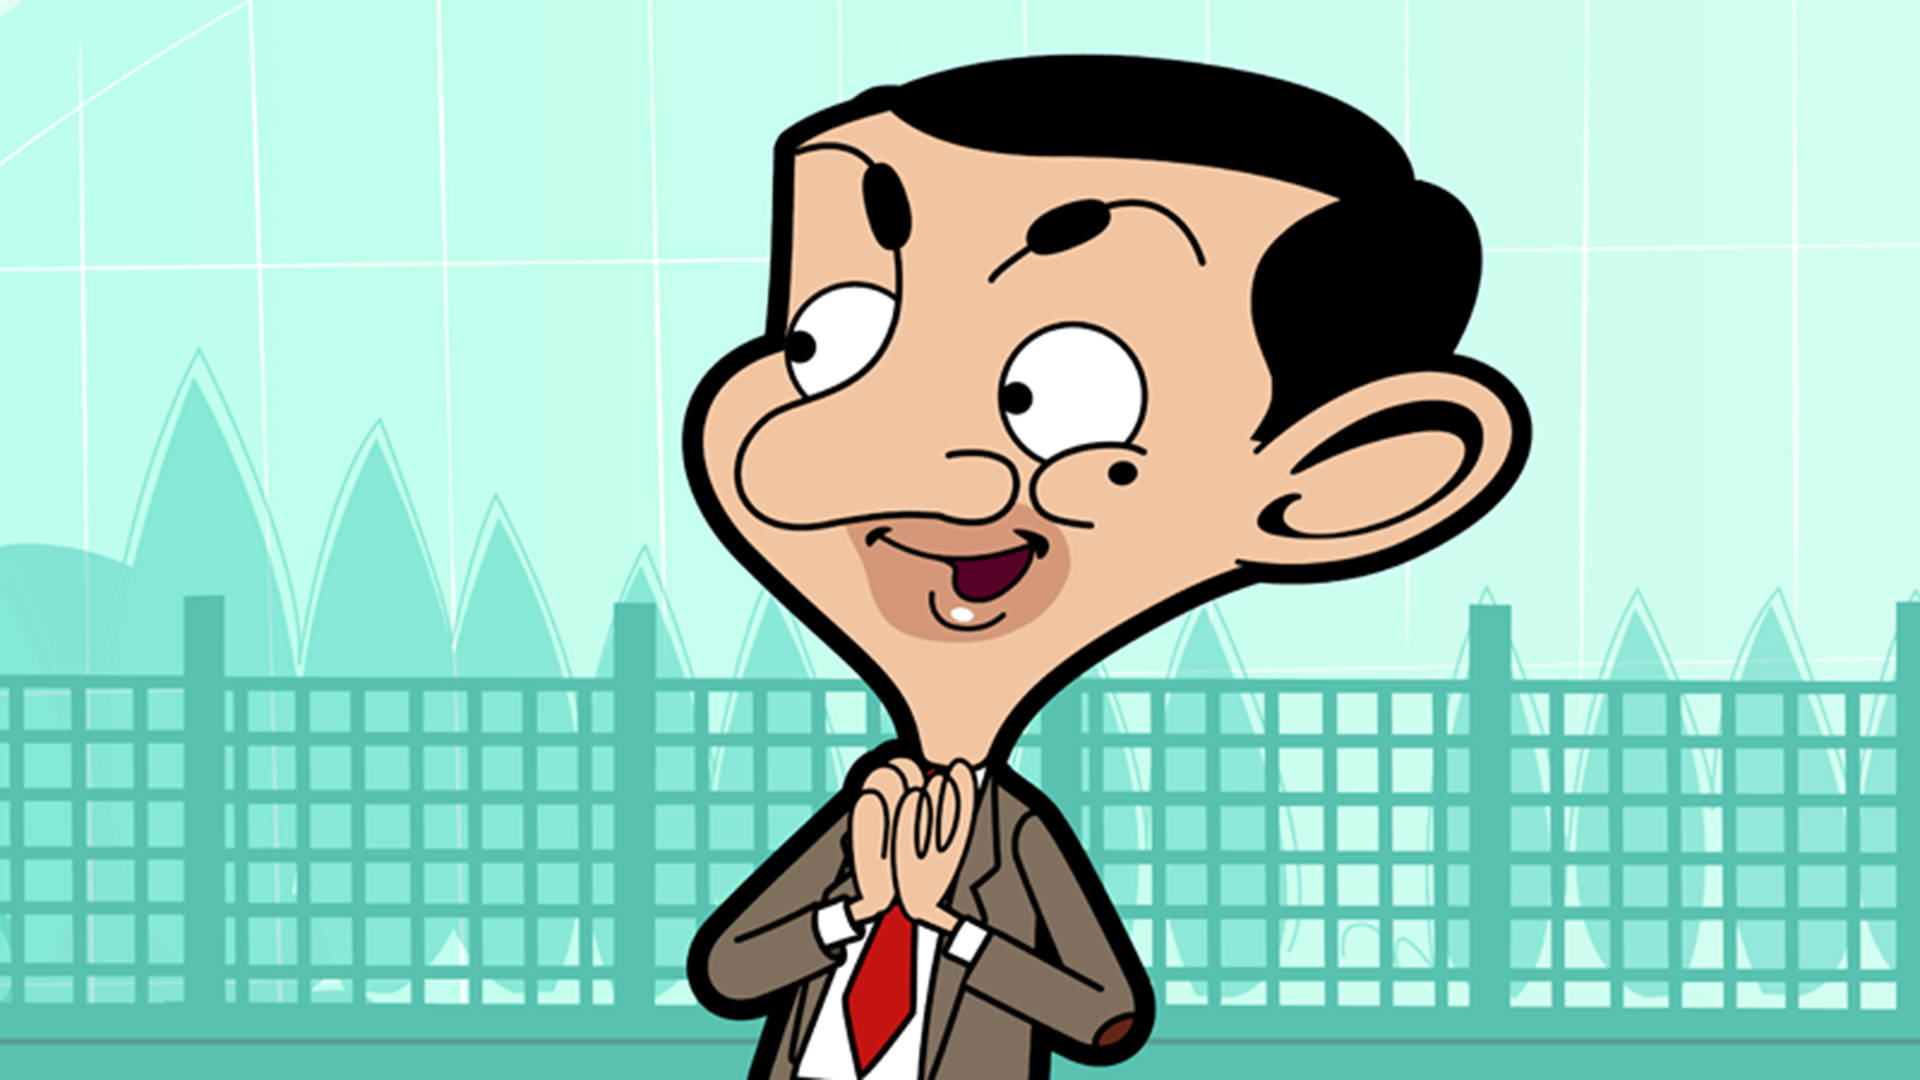 Mr. Bean The Animated Series 2002 Wallpaper